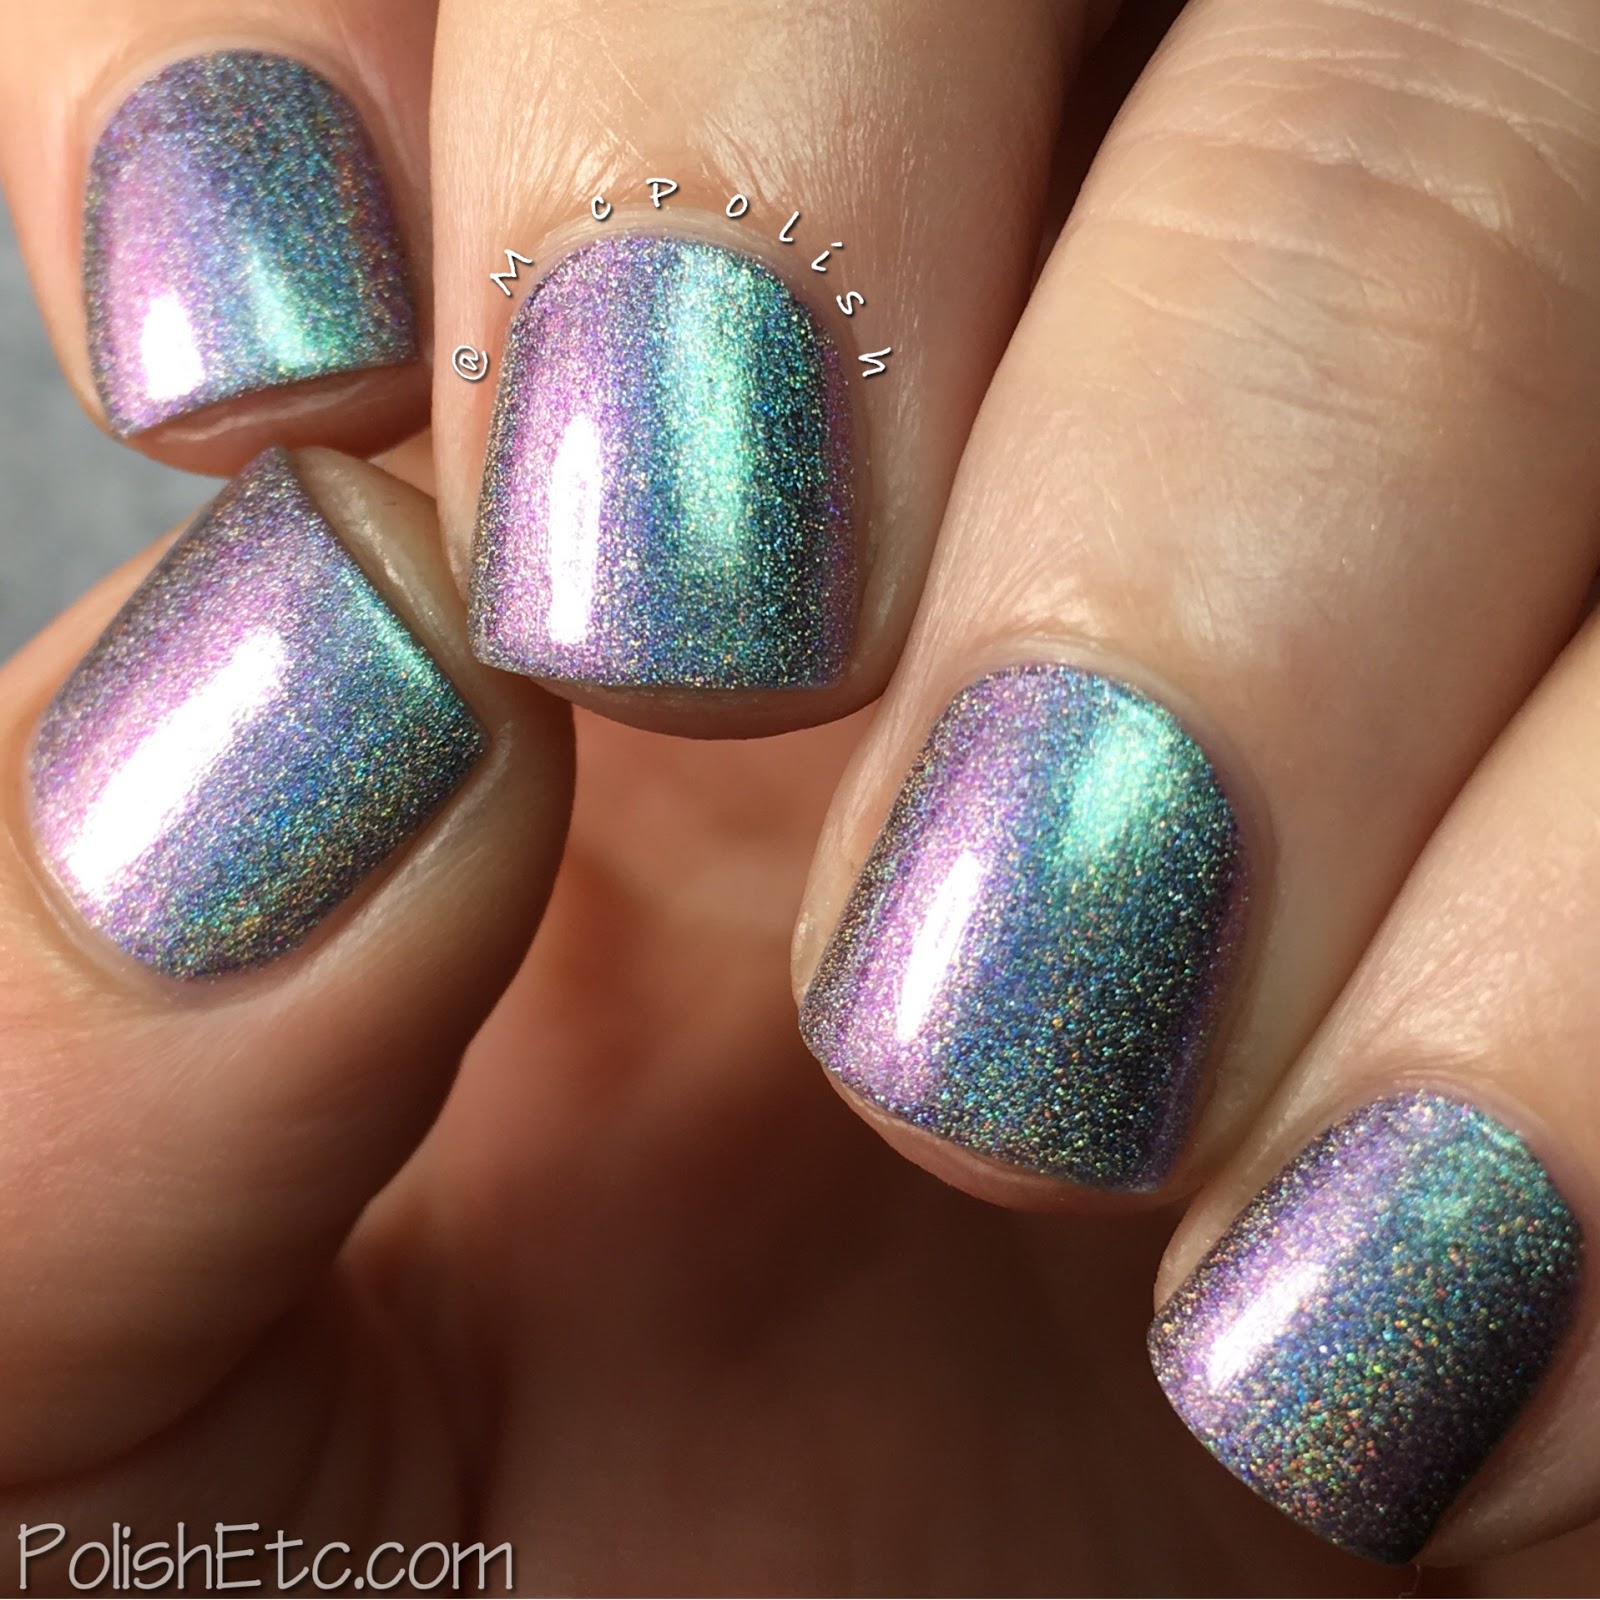 Great Lakes Lacquer - Polishing Poetic Collection - McPolish - Like Air, I'll Rise